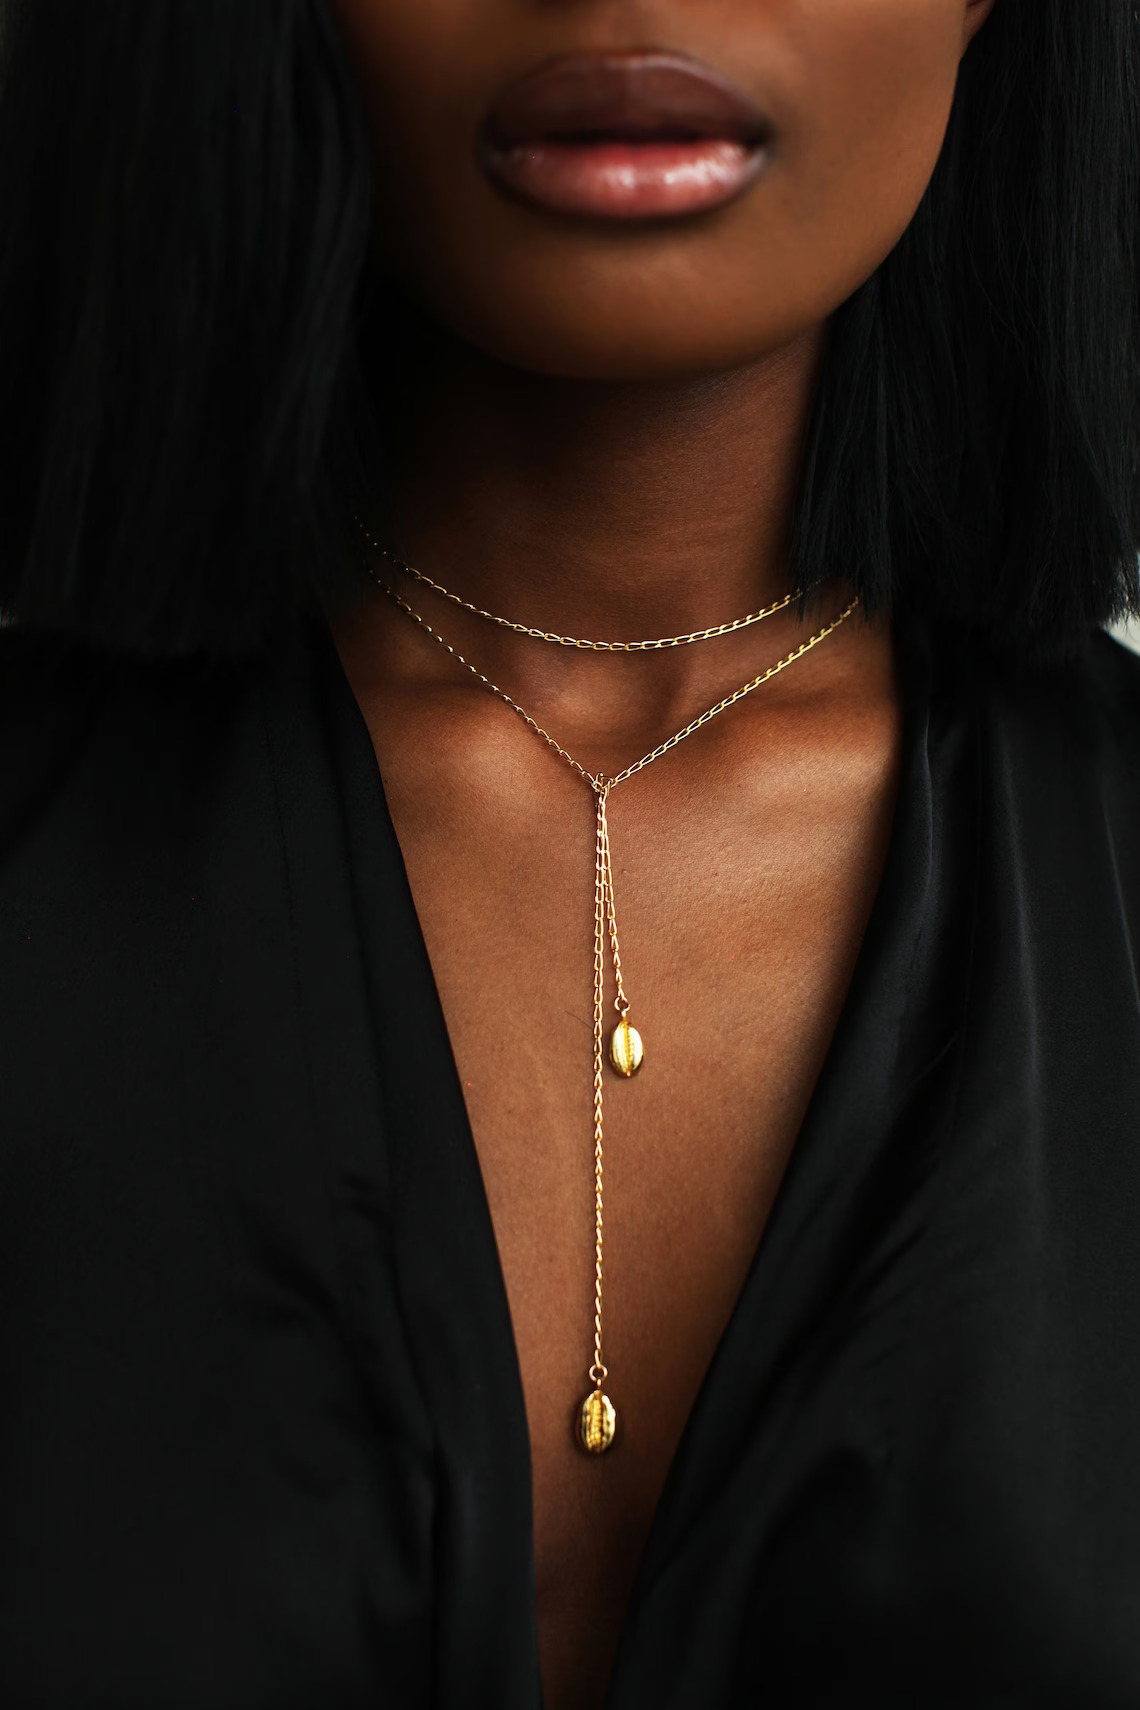 A close up shot of a model wearing a wraparound gold necklace by Etsy shop Omi Woods.